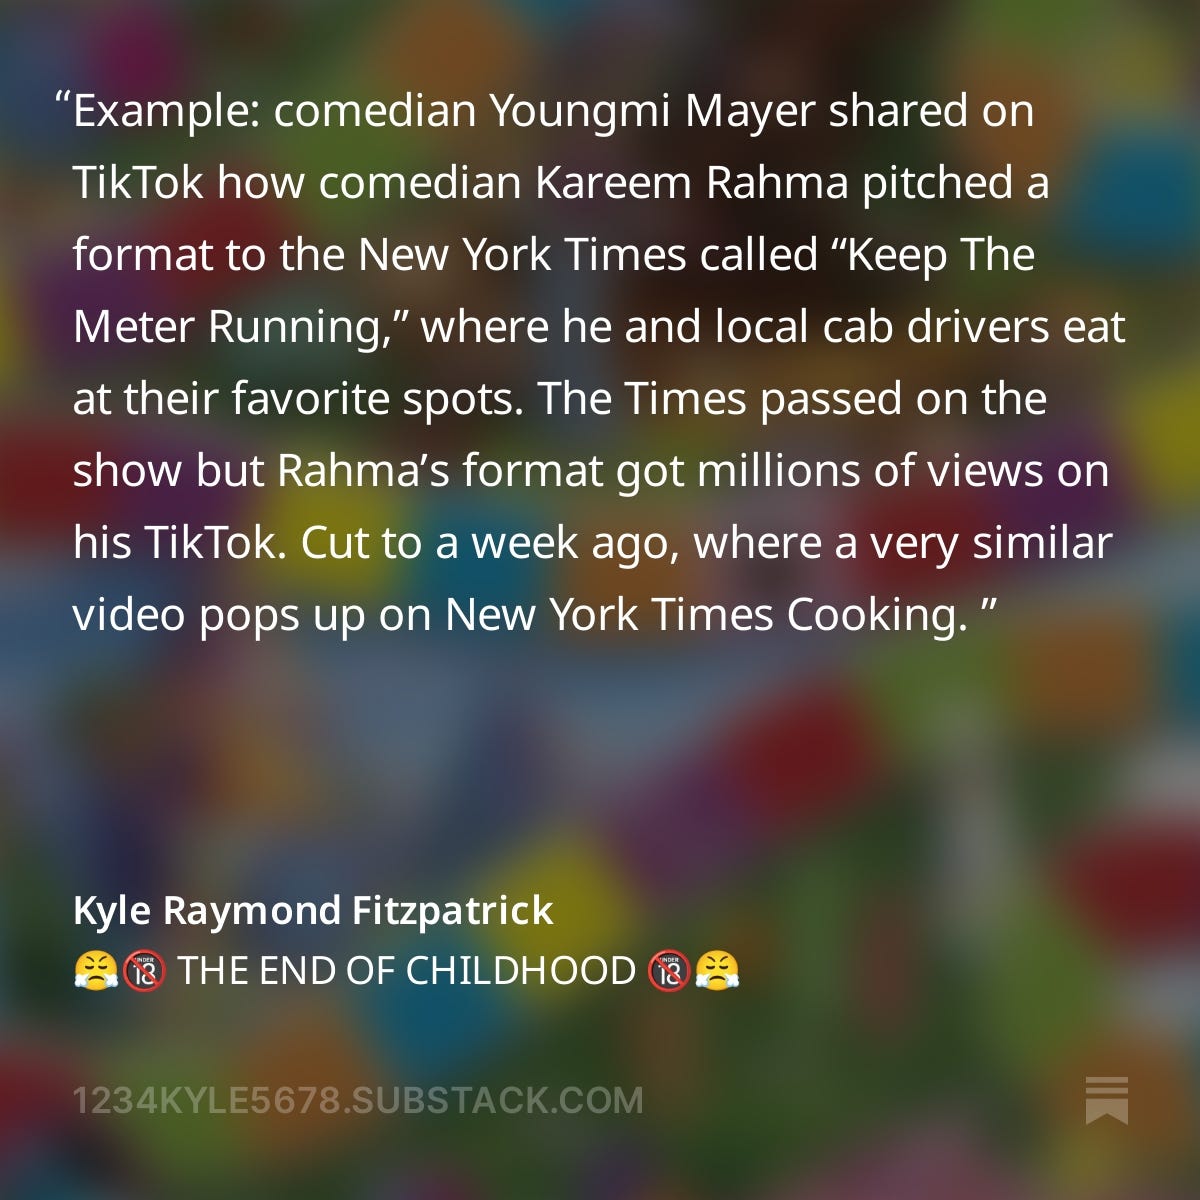 A screenshot from Kyle Raymond Fitzpatrick's The Trend Report newsletter post, "The end of childhood": Example: comedian Youngmi Mayer shared on TikTok how comedian Kareem Rahma pitched a format to the New York Times called “Keep The Meter Running,” where he and local cab drivers eat at their favorite spots. The Times passed on the show but Rahma’s format got millions of views on his TikTok. Cut to a week ago, where a very similar video pops up on New York Times Cooking. 